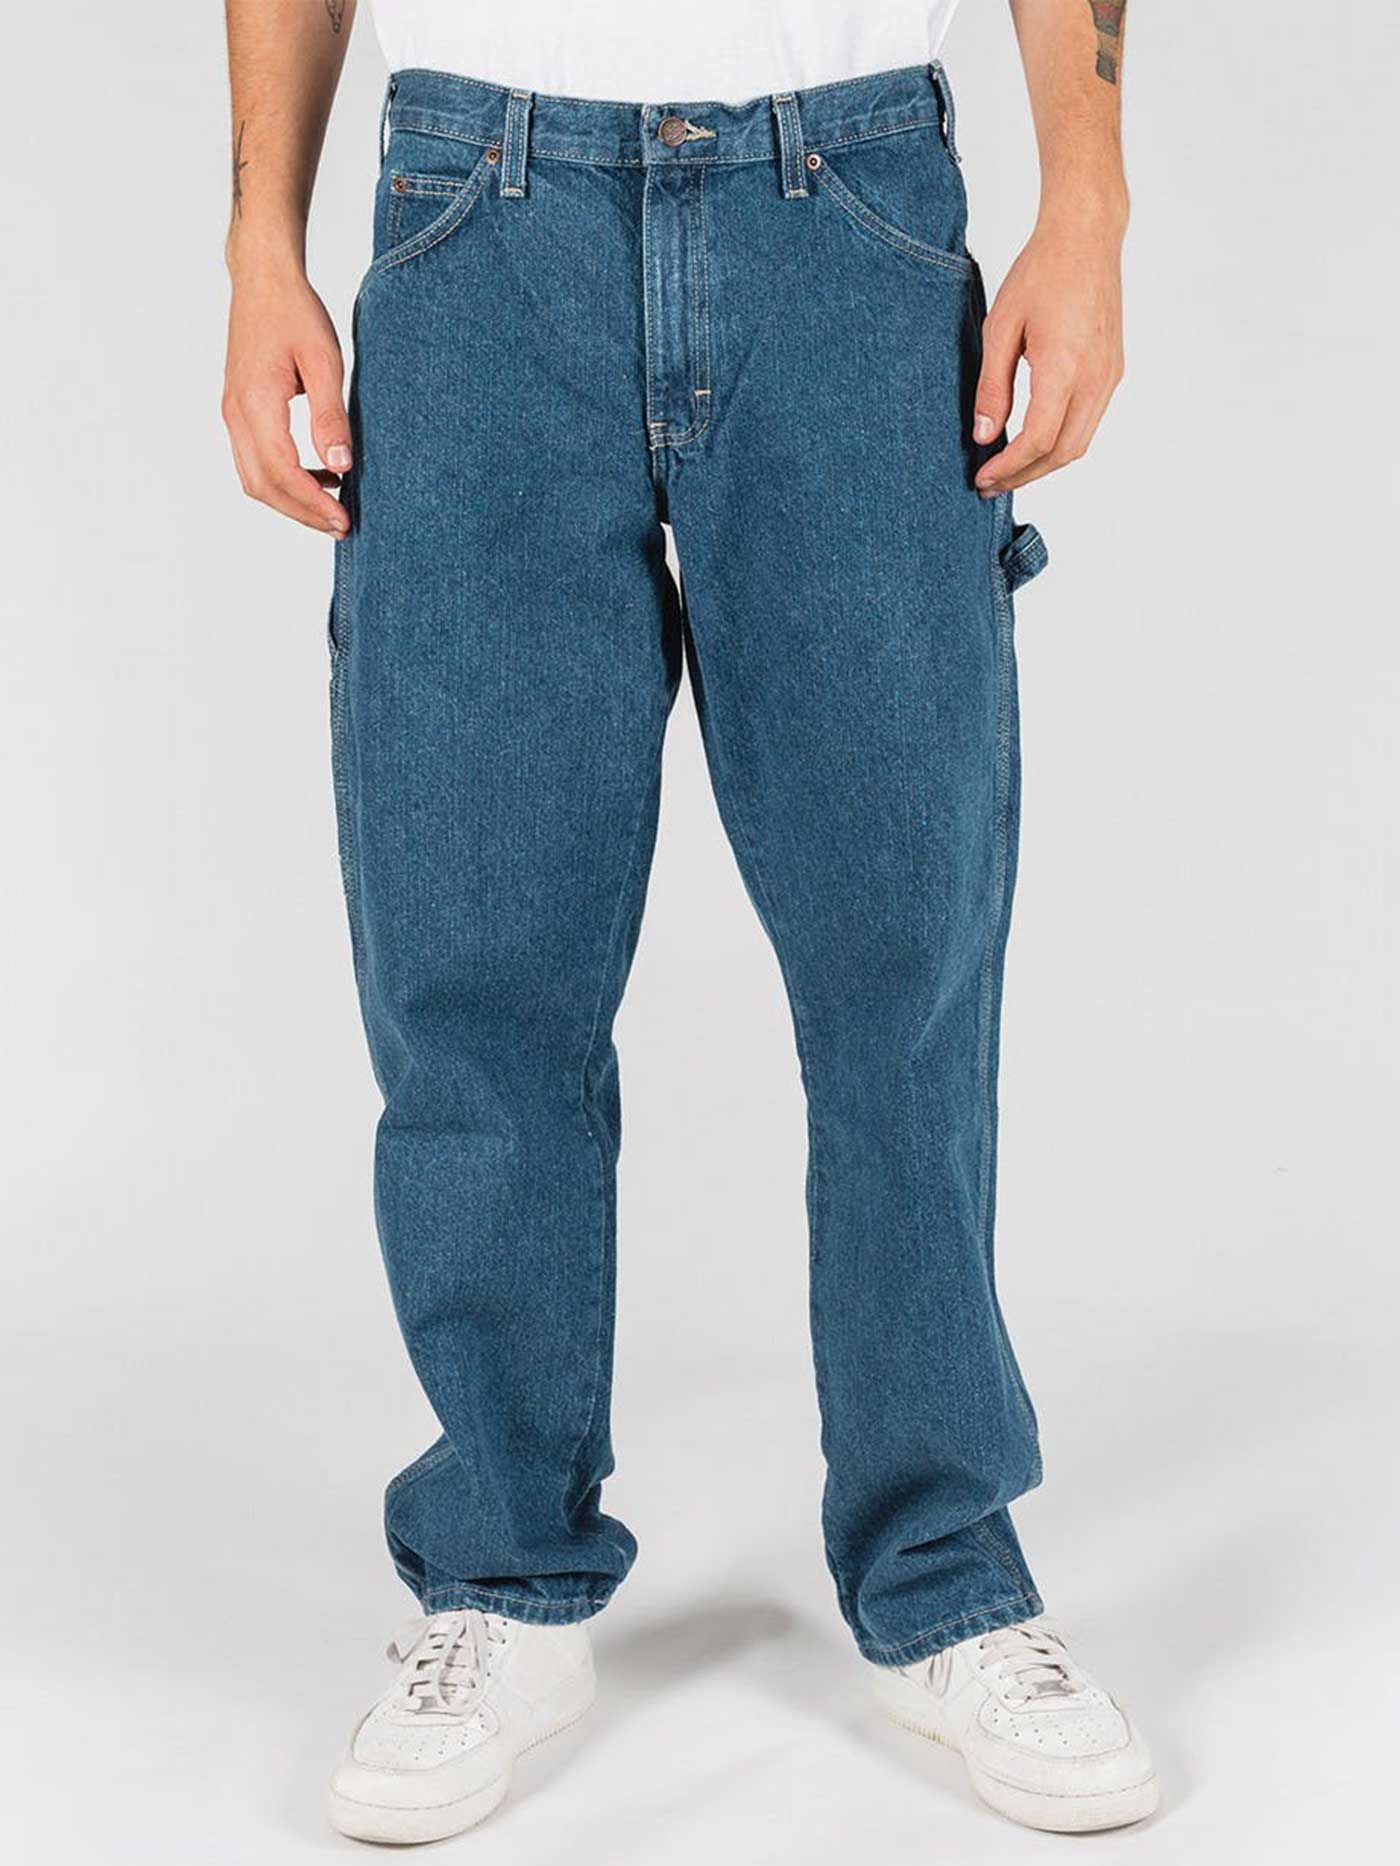 Dickies Carpenter Relax Fit Jeans